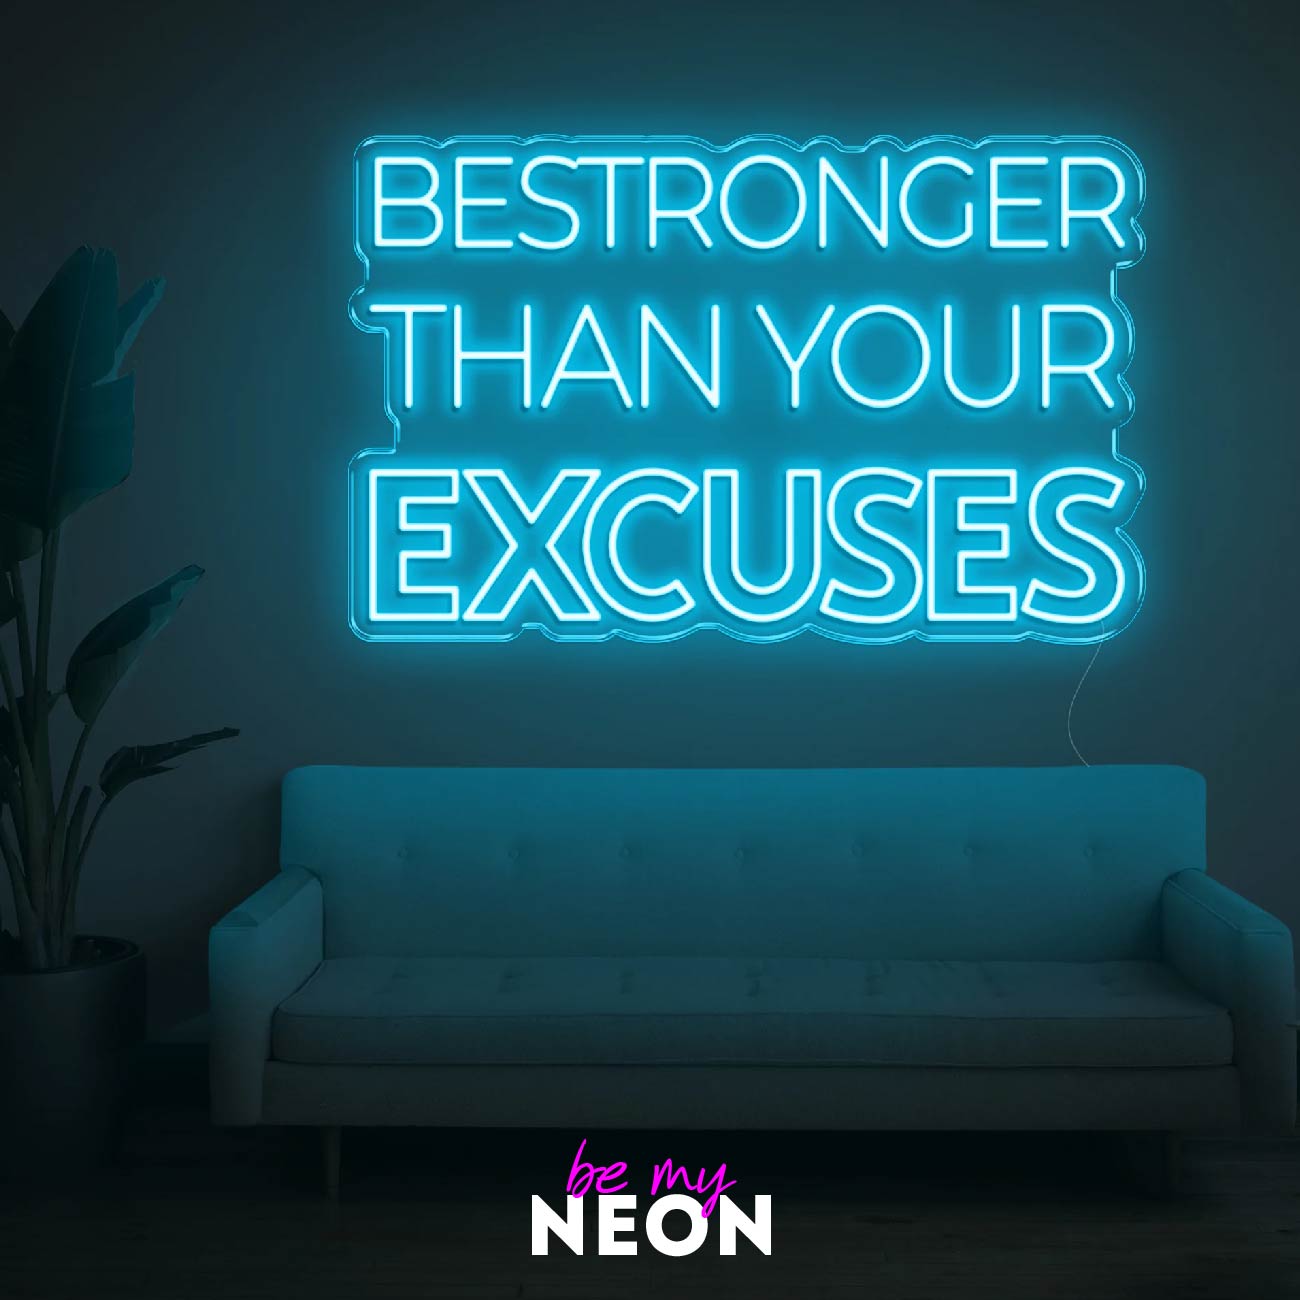 "Be stronger than your excuses" LED Neonschild